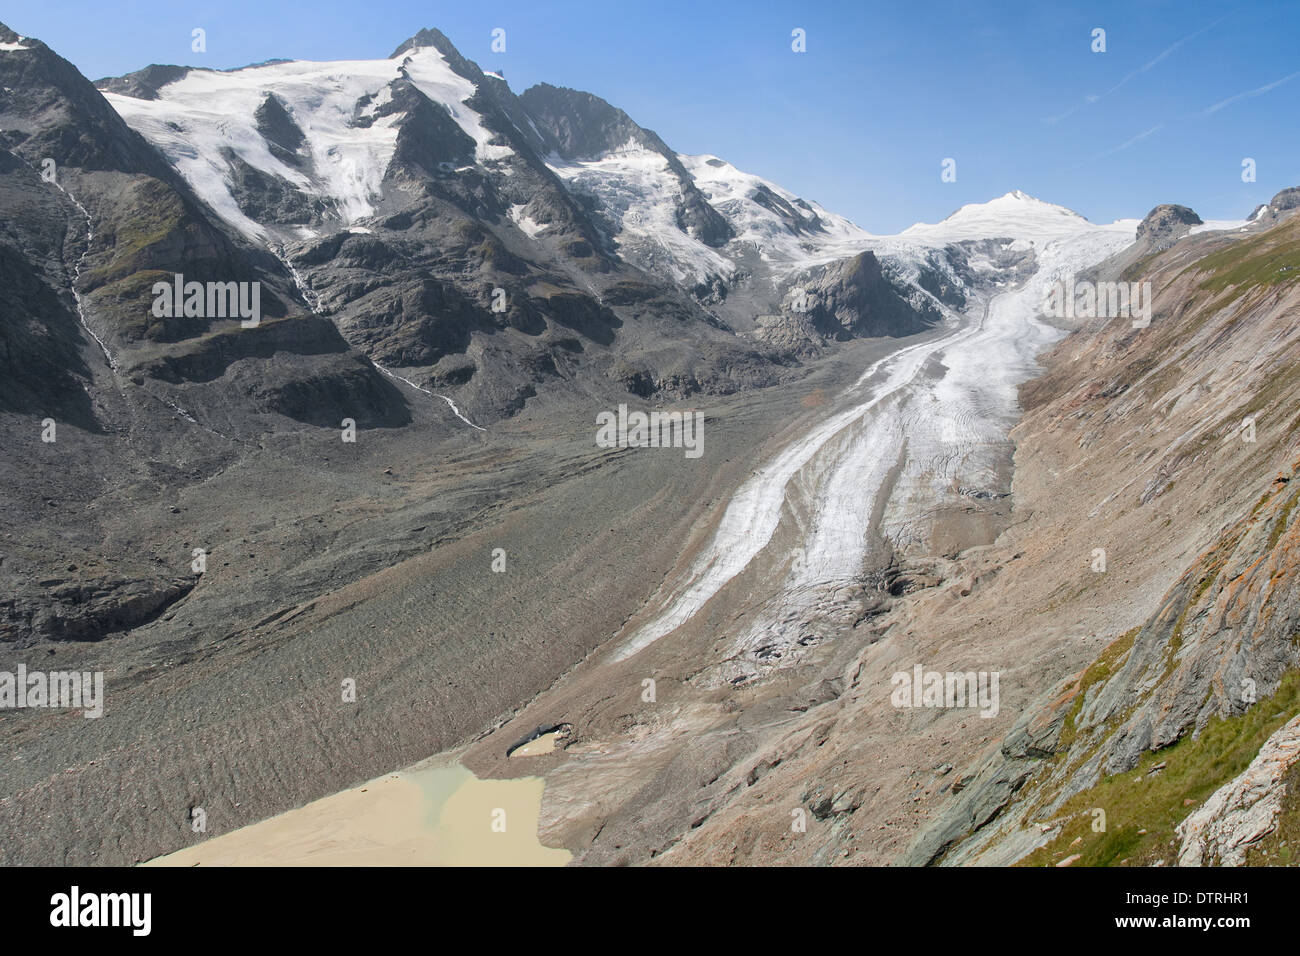 Grossglockner and Pasterze glacier in the Hohe Tauern mountain range in Carinthia, Austria. Stock Photo